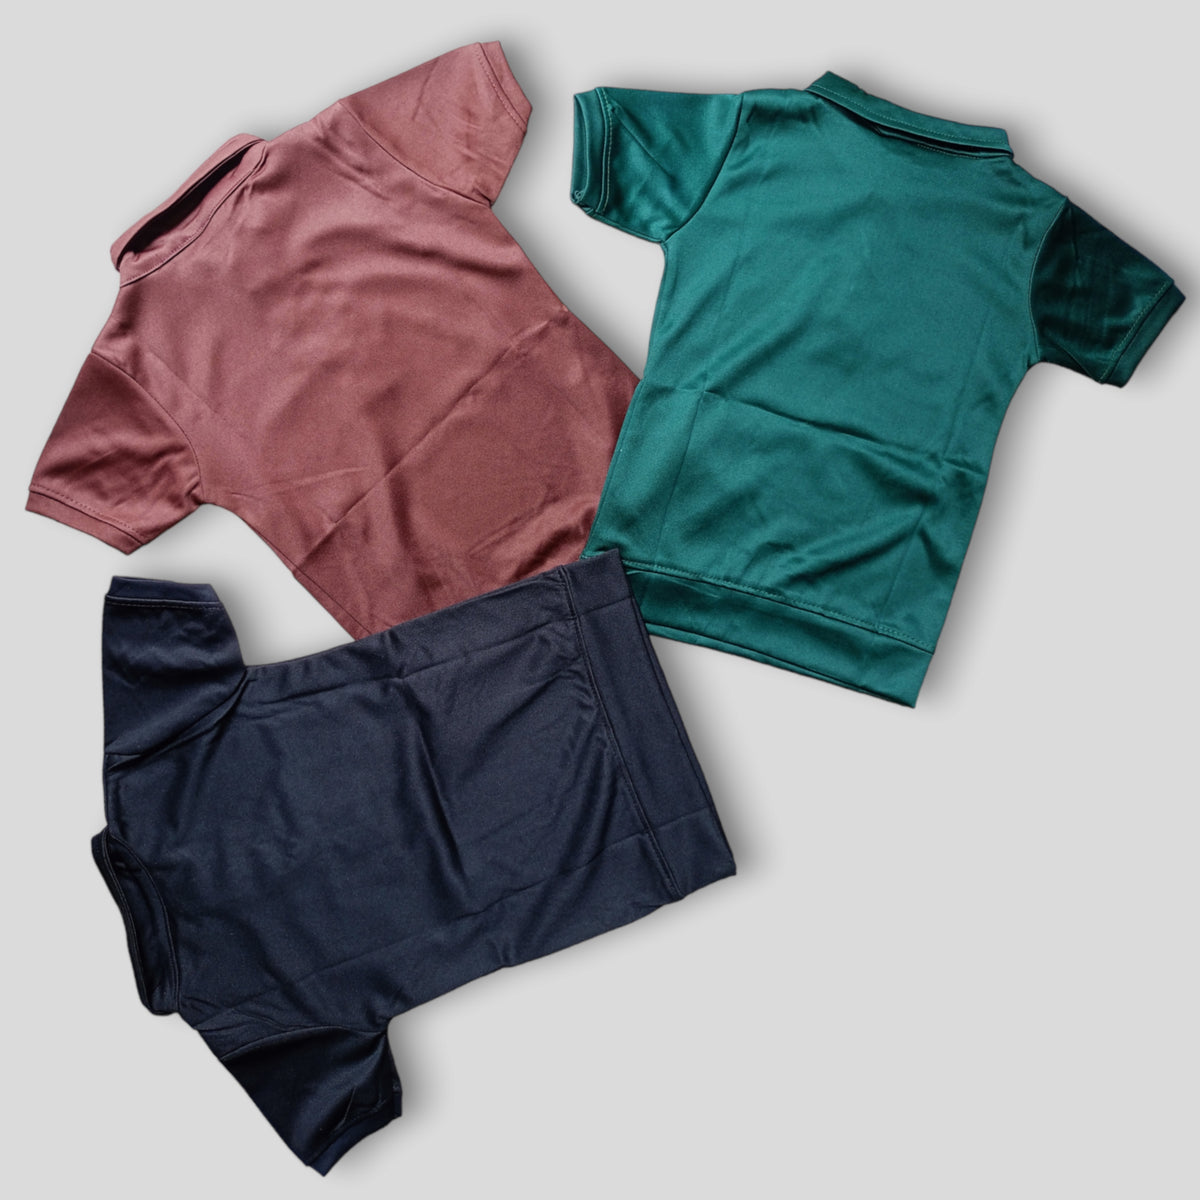 Dark Edition Collor T-shirt Pack OF 3